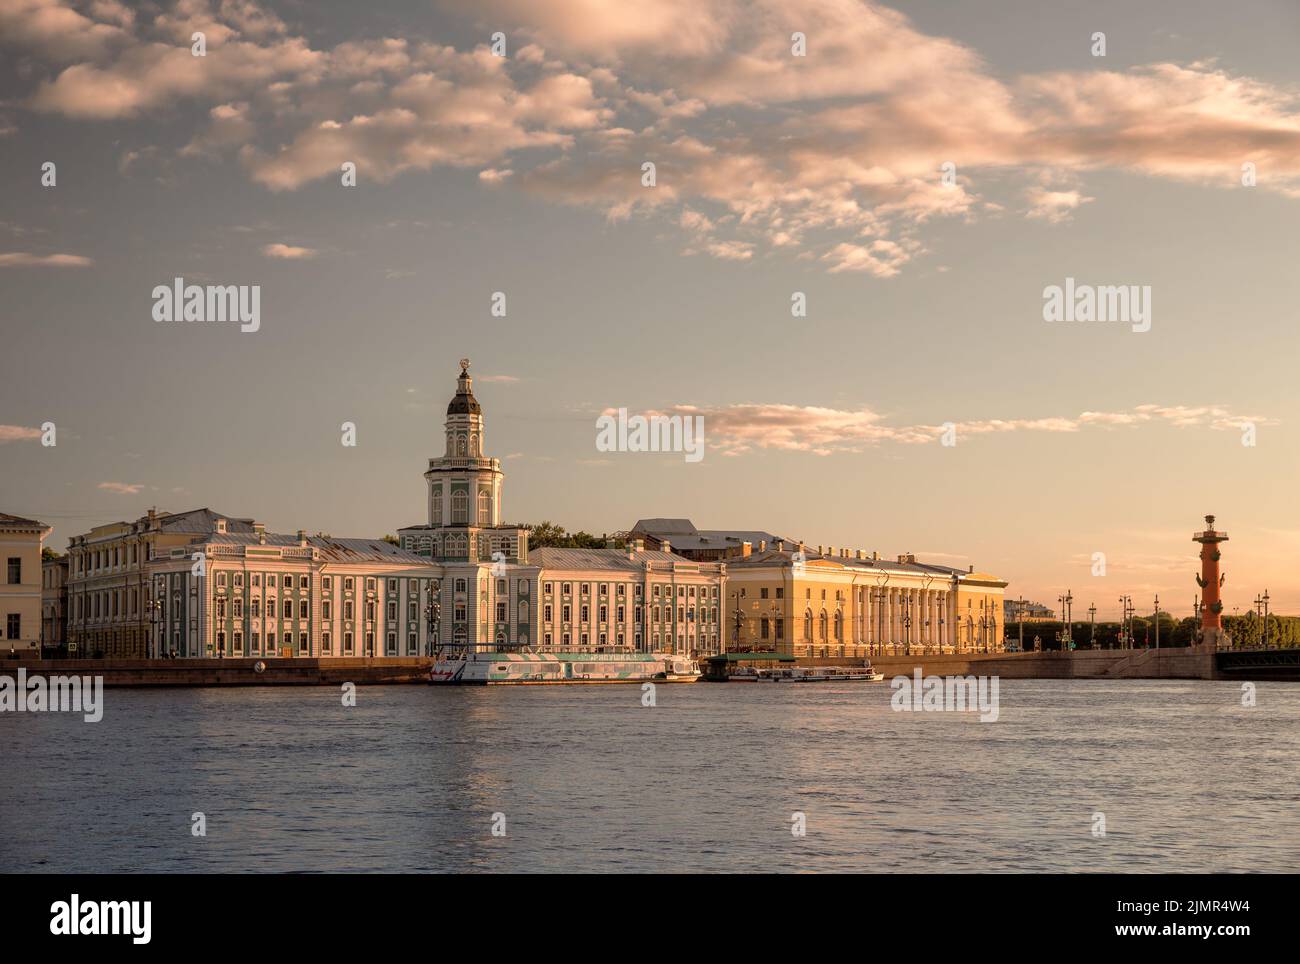 St. Petersburg, Russia - July 17, 2022: View of the University embankment and museum buildings, the Kunstkamera (Museum of Anthropology and Ethnograph Stock Photo